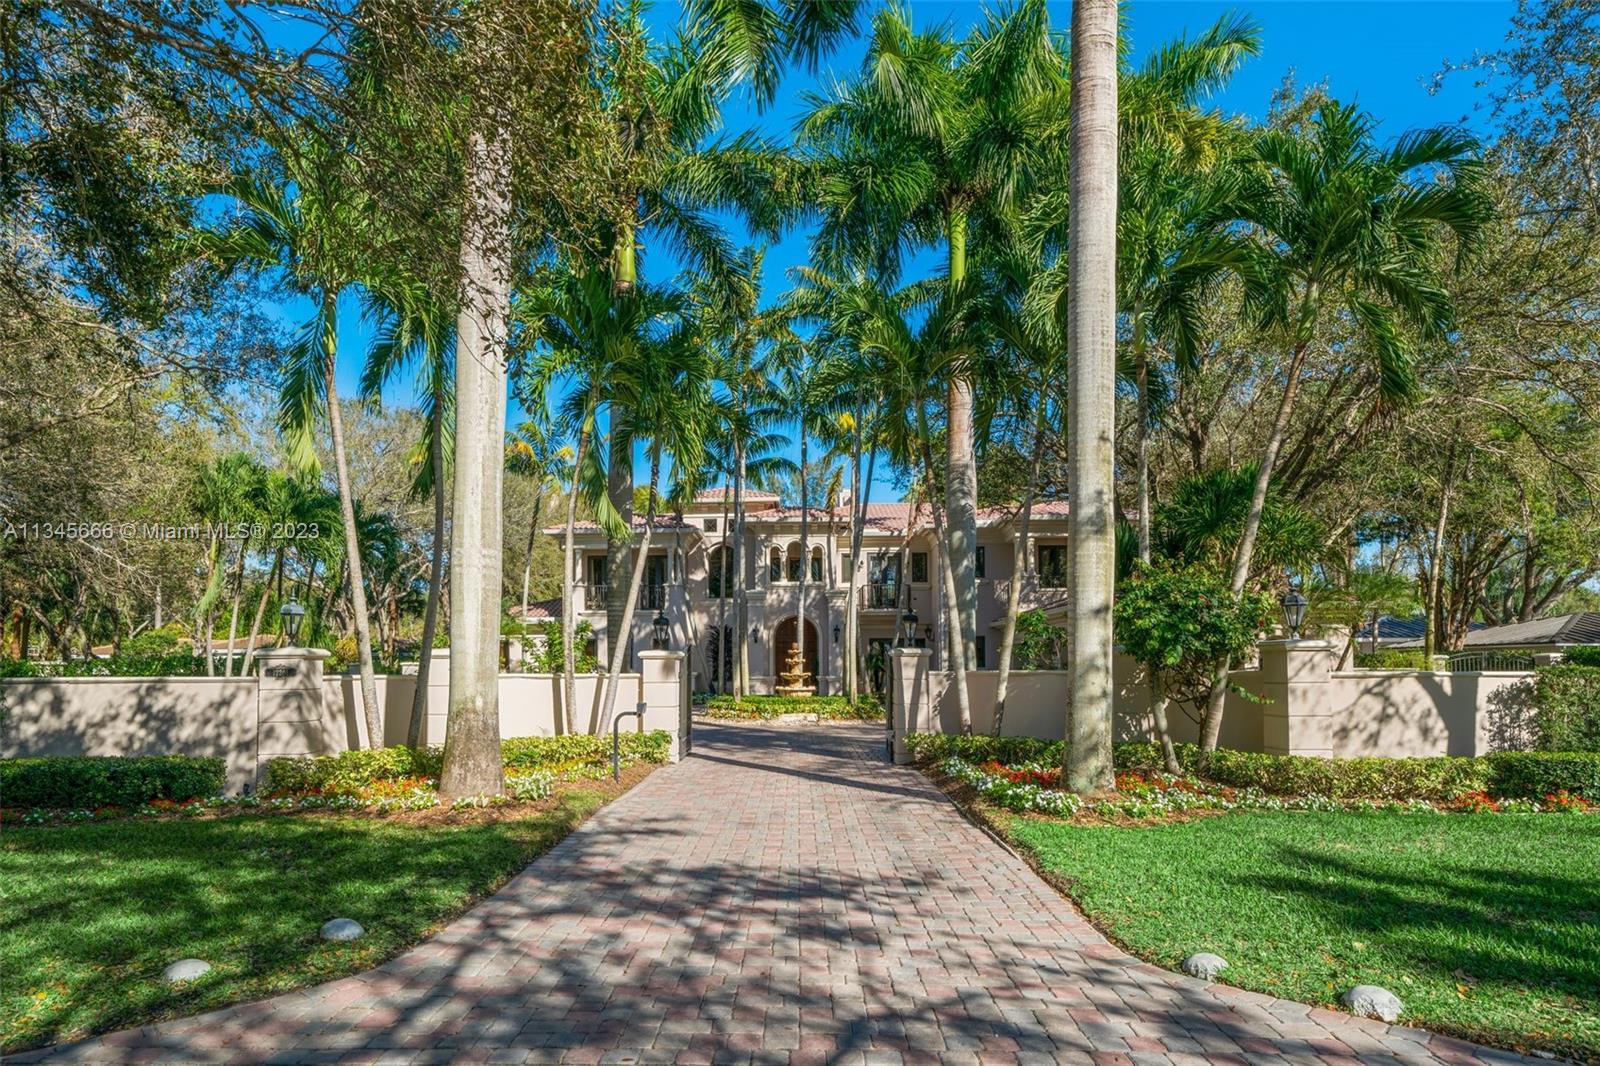 This stunning 6,626 sq ft home with 6 bedrooms, 7 bathrooms and 1 half-bathroom is on a lushly landscaped 47,916 sq ft lot in the desirable Pinecrest community. The grand entrance area features a foyer with soaring ceilings, marble flooring and beautiful natural light. Living areas in the open floor plan include a formal living room and fireplace, formal dining room, gourmet kitchen, and a family room that overlooks the magnificent backyard oasis. The main suite on the ground floor provides a private retreat and a luxurious spa-like bathroom with double vanities. Additional features include an elegant library, large covered terrace, sparkling pool, jacuzzi, playground and a summer kitchen. A unique estate perfect for family fun and​​‌​​​​‌​​‌‌​‌‌‌​​‌‌​‌‌‌​​‌‌​‌‌‌ recreation.